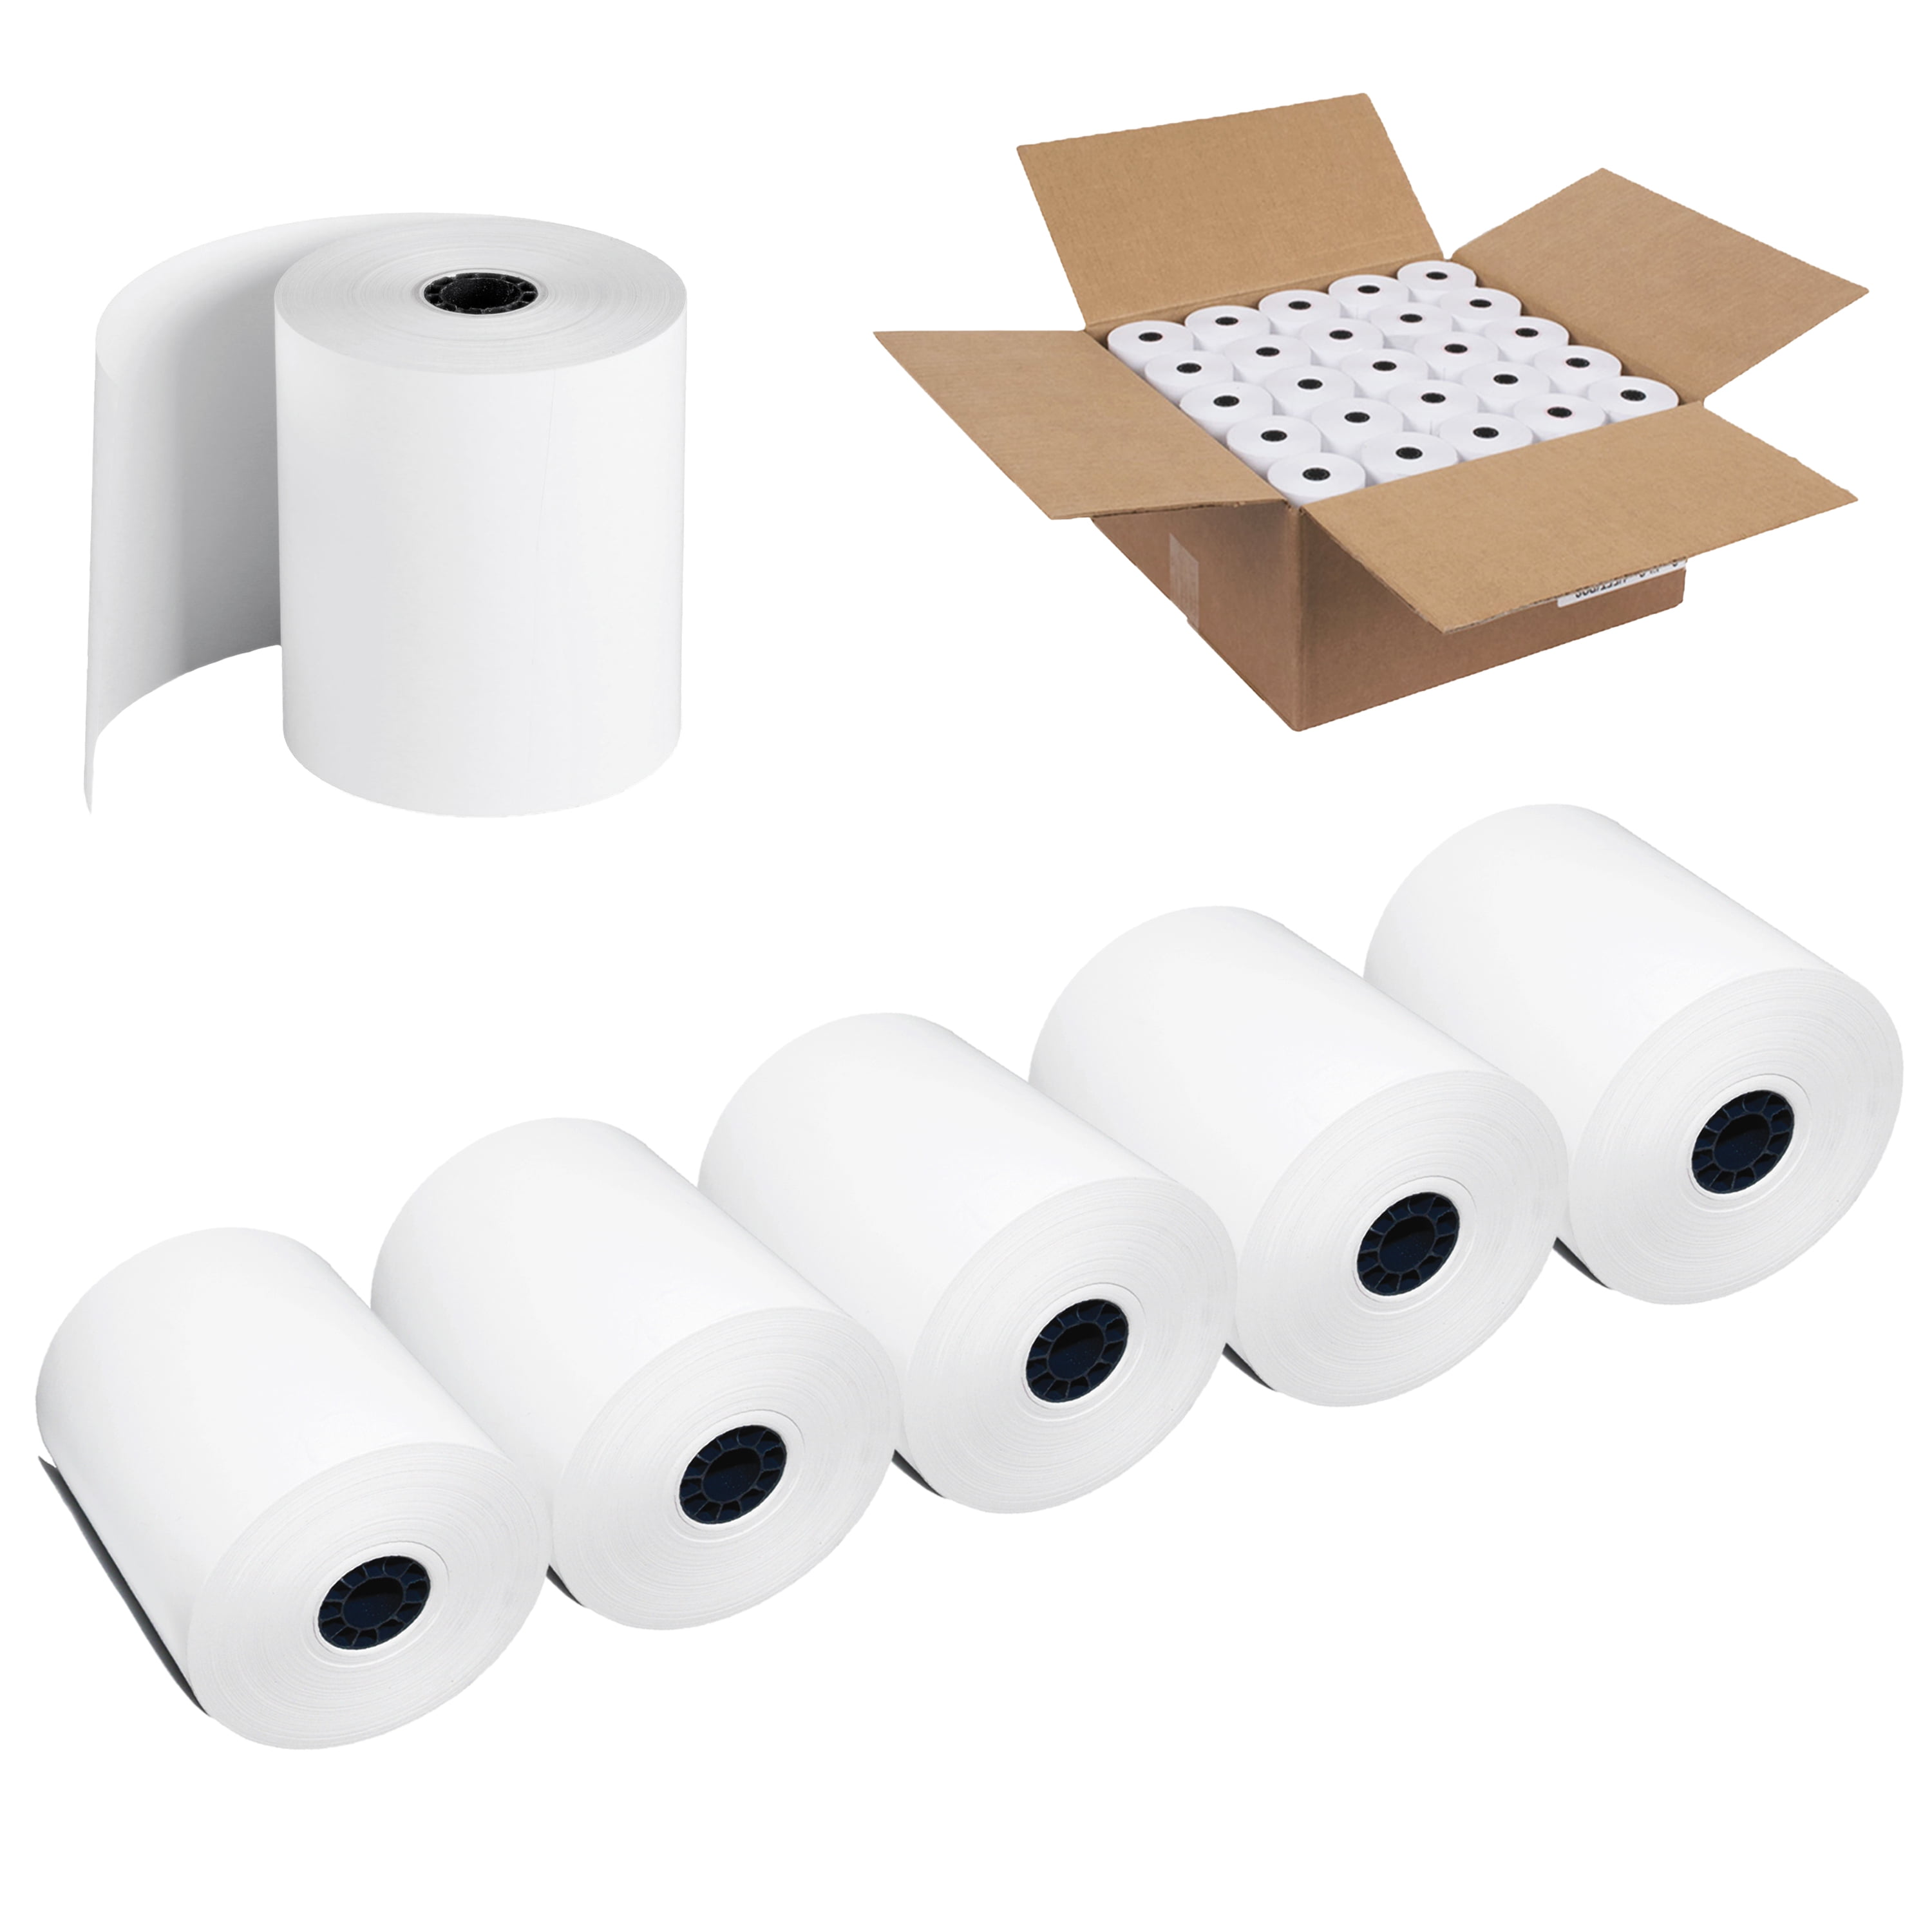 Made in USA BPA FREE Square POS Register Thermal Receipt Paper Rolls 3-1/8 inches x 230ft 60 Pack Epsilont 